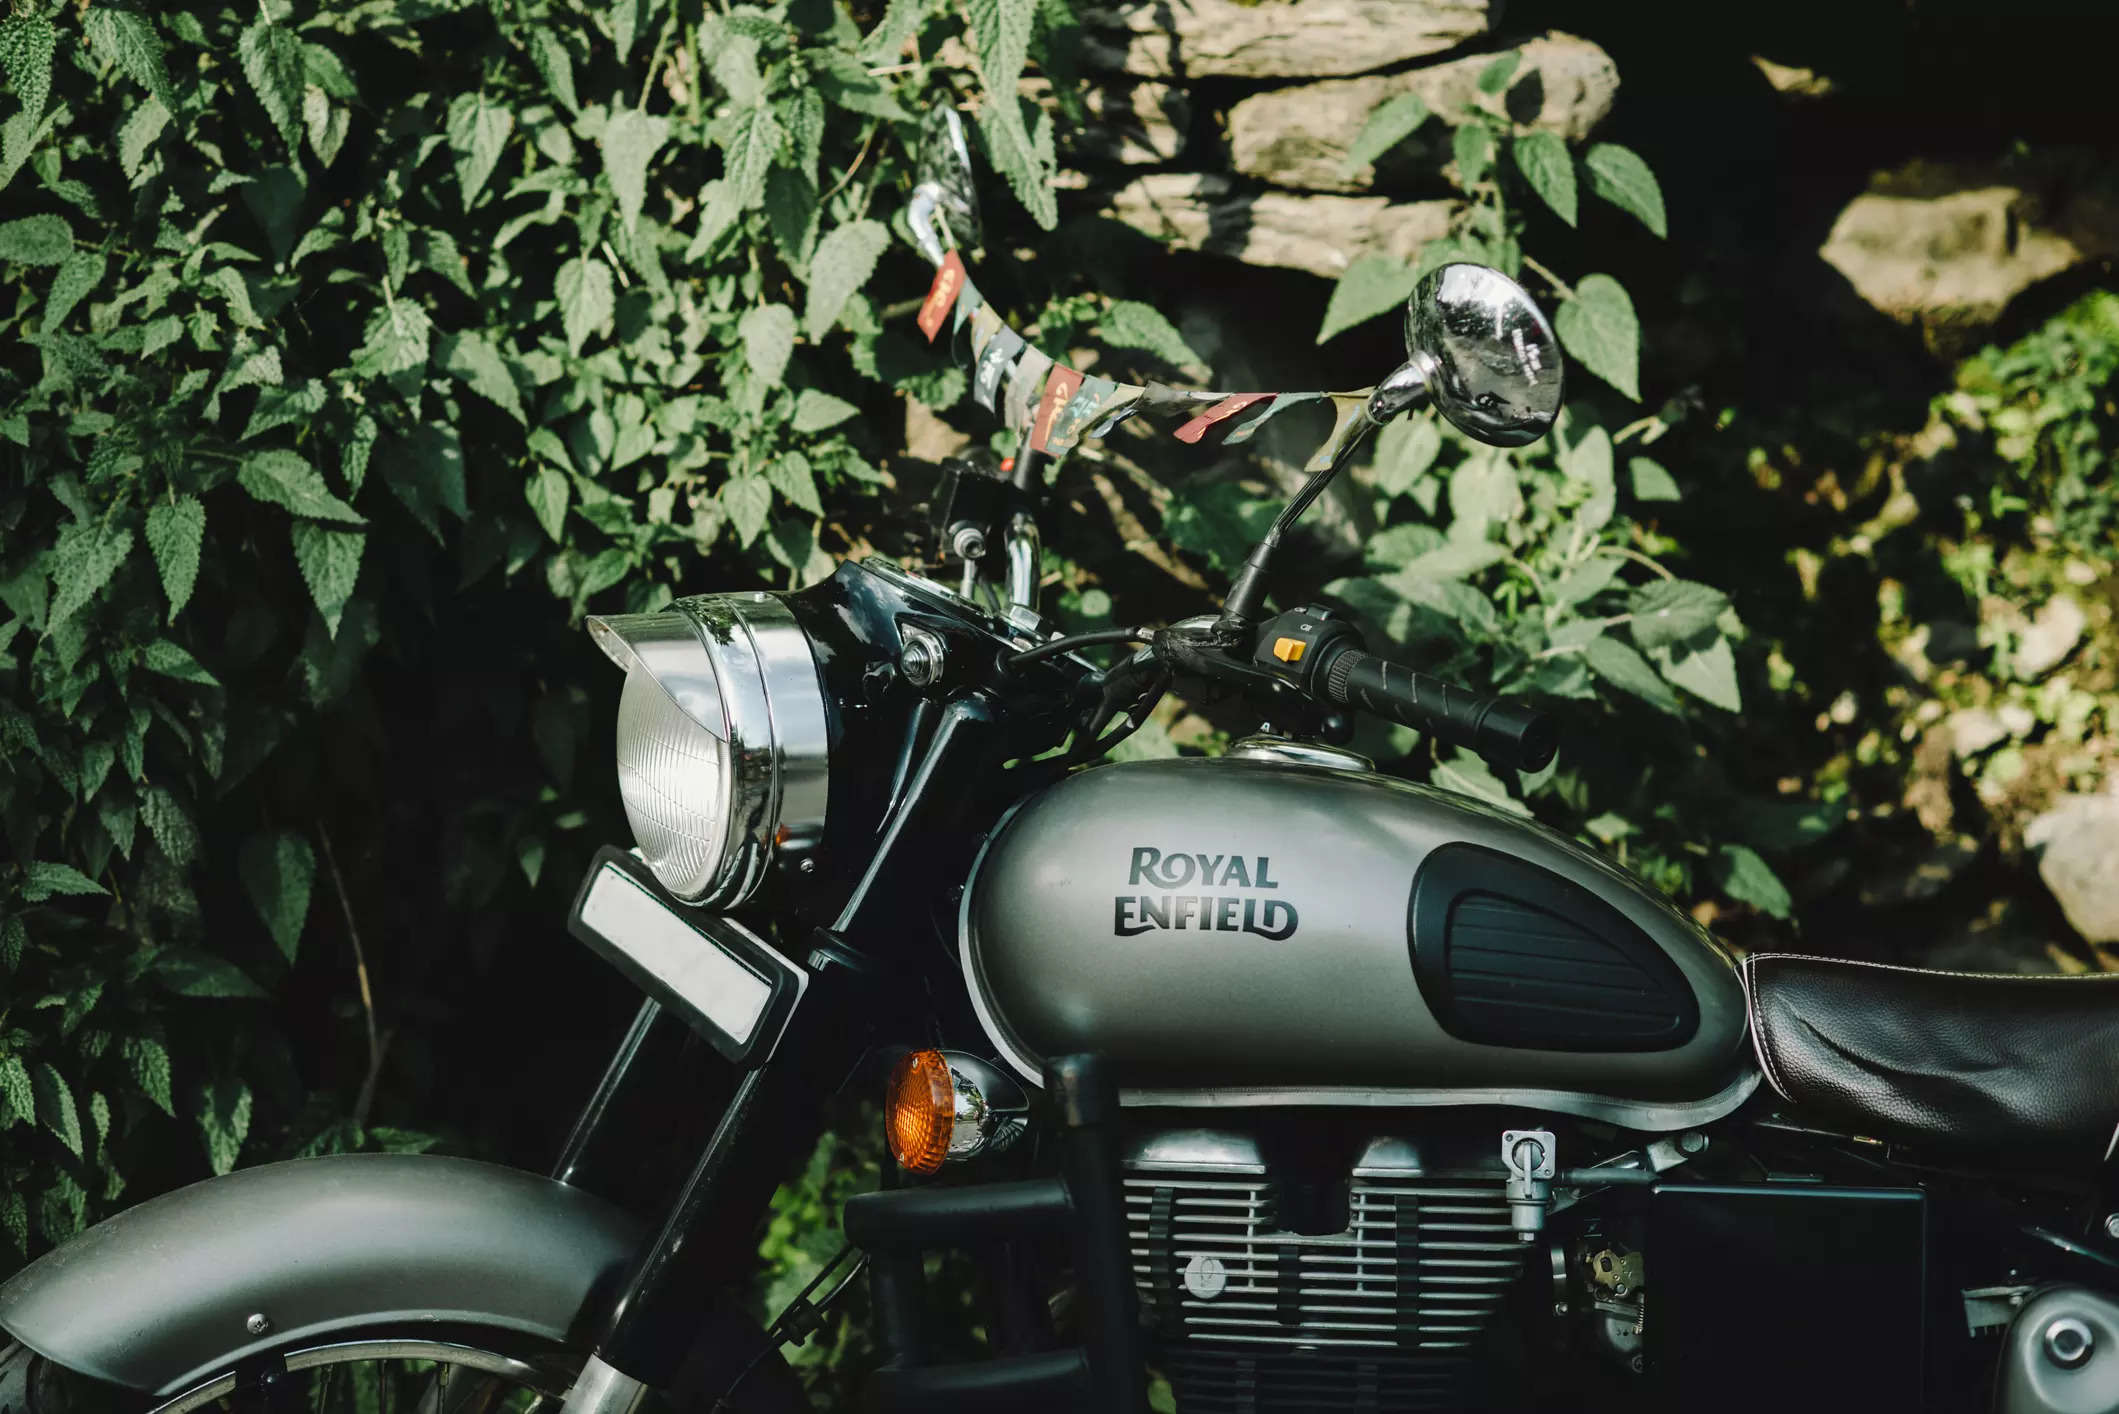 <p>Royal Enfield plans to launch four new products, including the RE Himalayan 450 Roadster and RE Shotgun 650, in the ongoing financial year, said industry sources.</p>